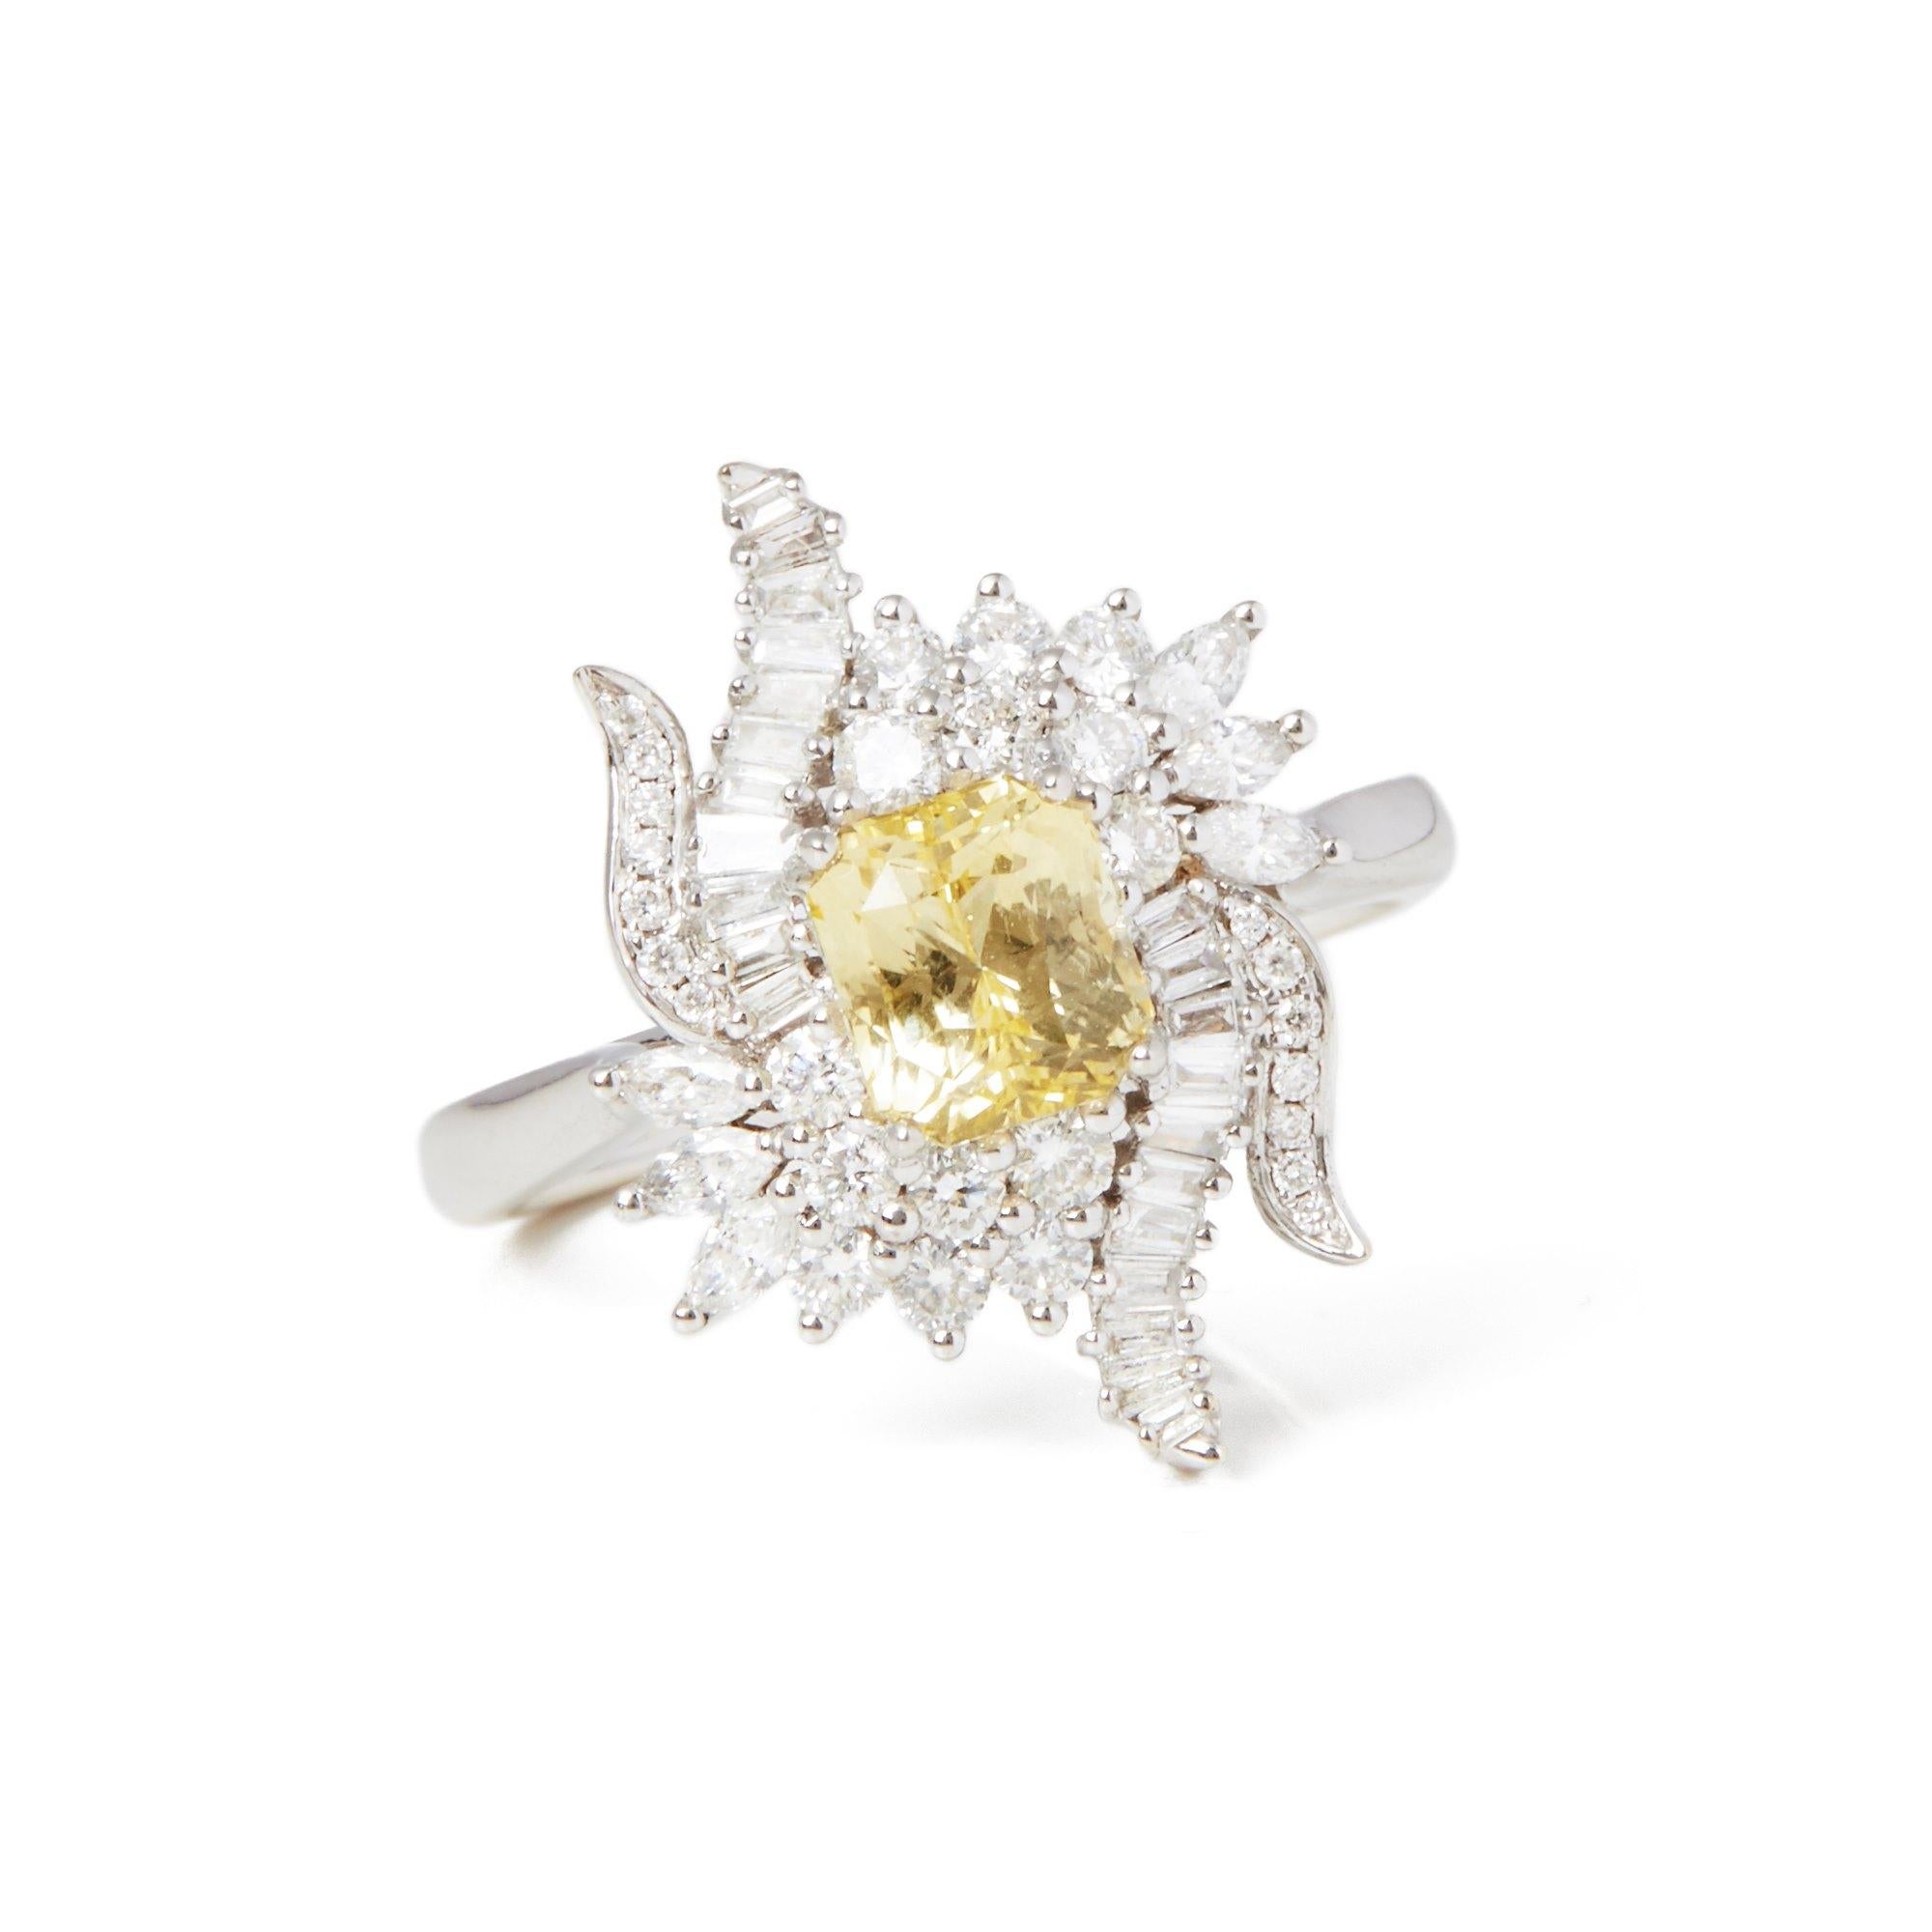 This ring designed by David Jerome is from his private collection and features one natural unheated octagonal scissor cut yellow Sapphire totalling 1.57cts sourced in Sri Lanka. Set with round brilliant cut diamonds totalling 0.94cts mounted in an